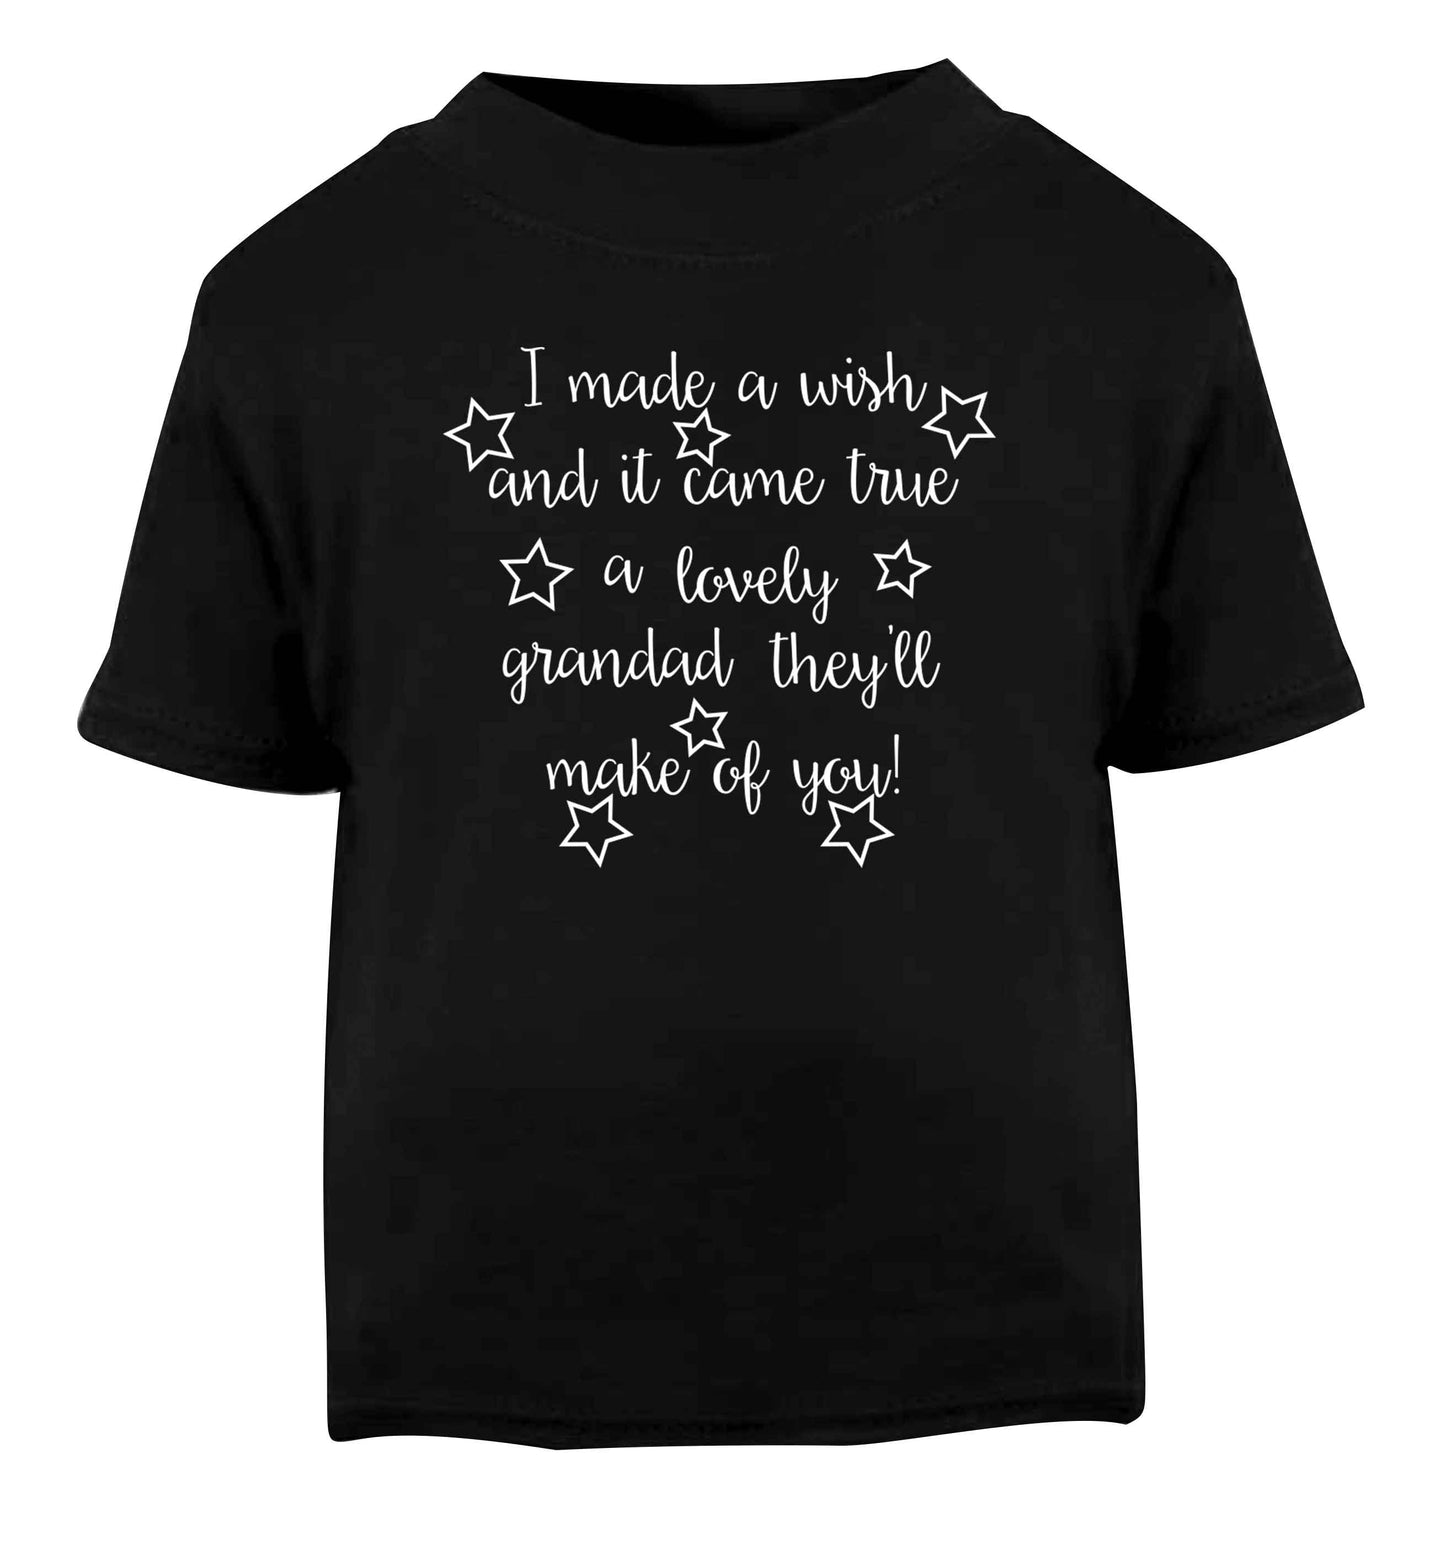 I made a wish and it came true a lovely grandad they'll make of you! Black Baby Toddler Tshirt 2 years